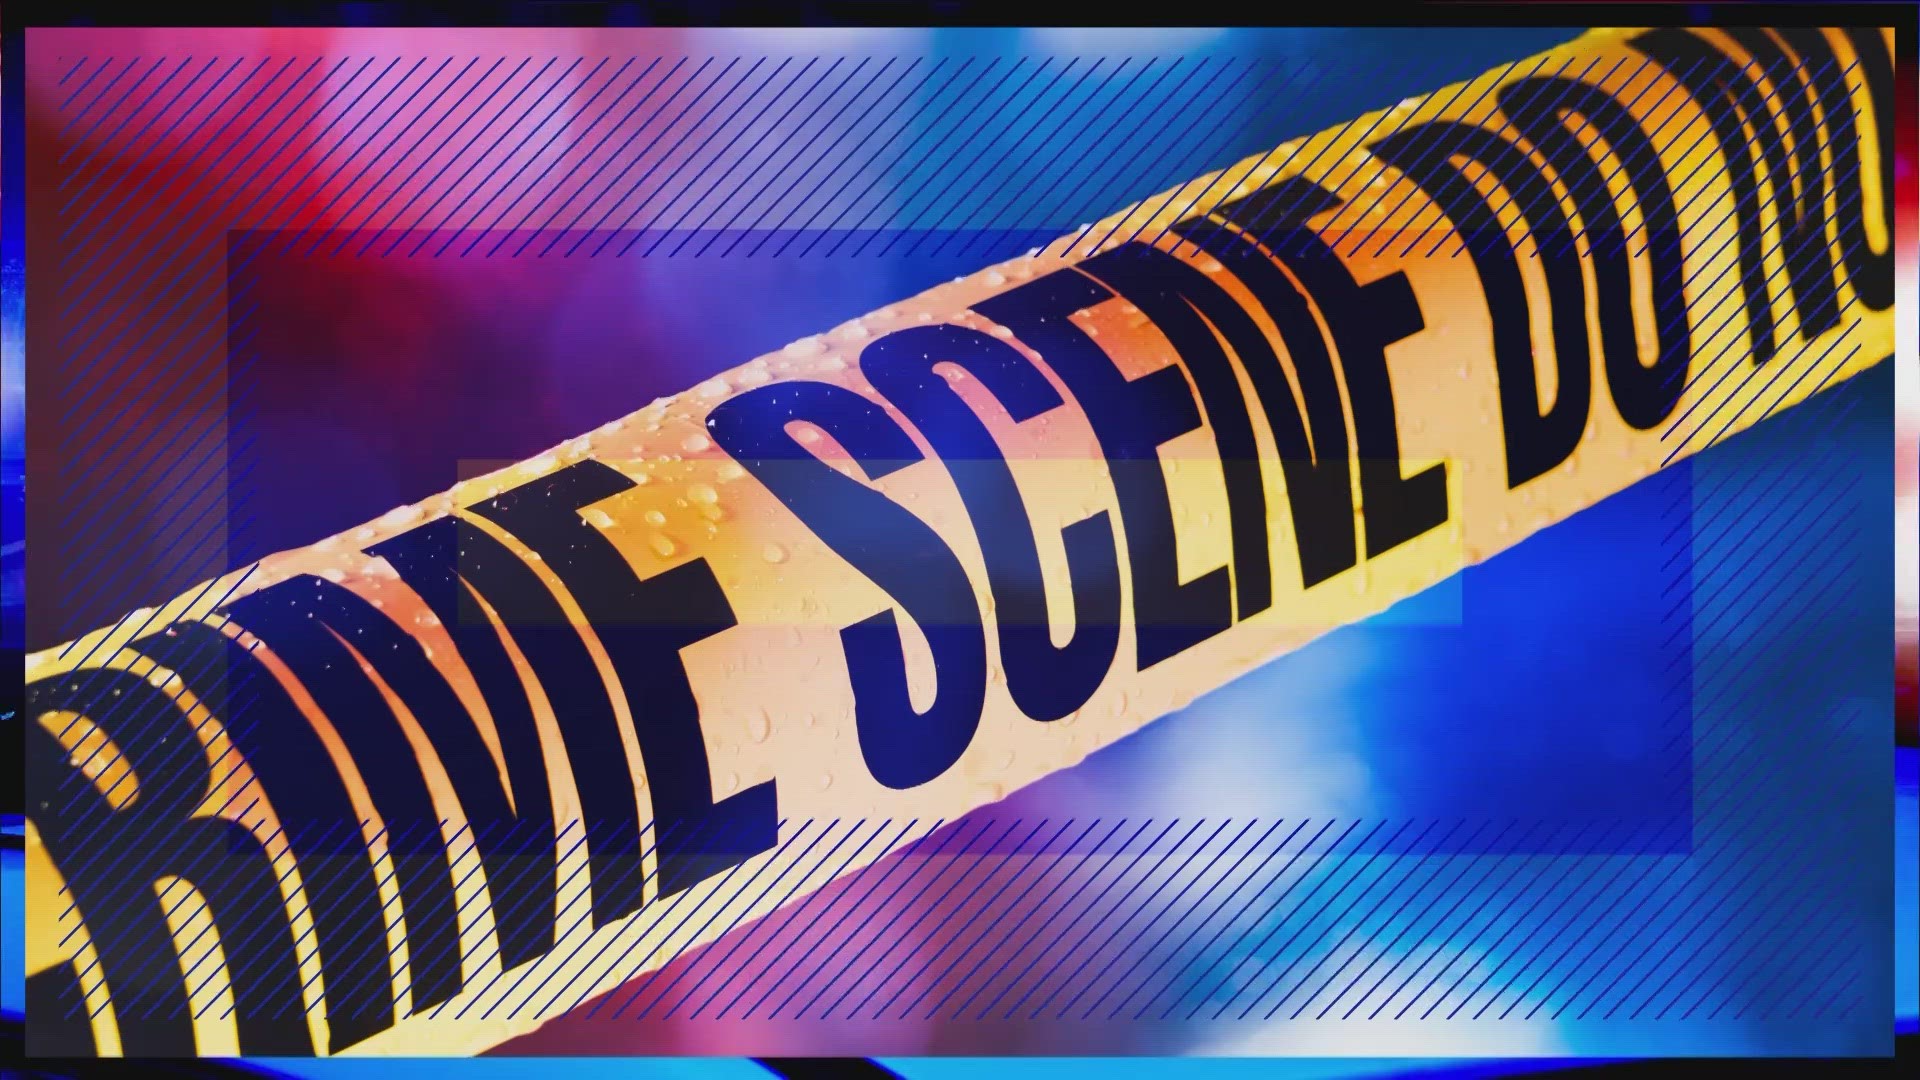 Law enforcement are investigating multiple shooting incidents that occurred over the weekend.